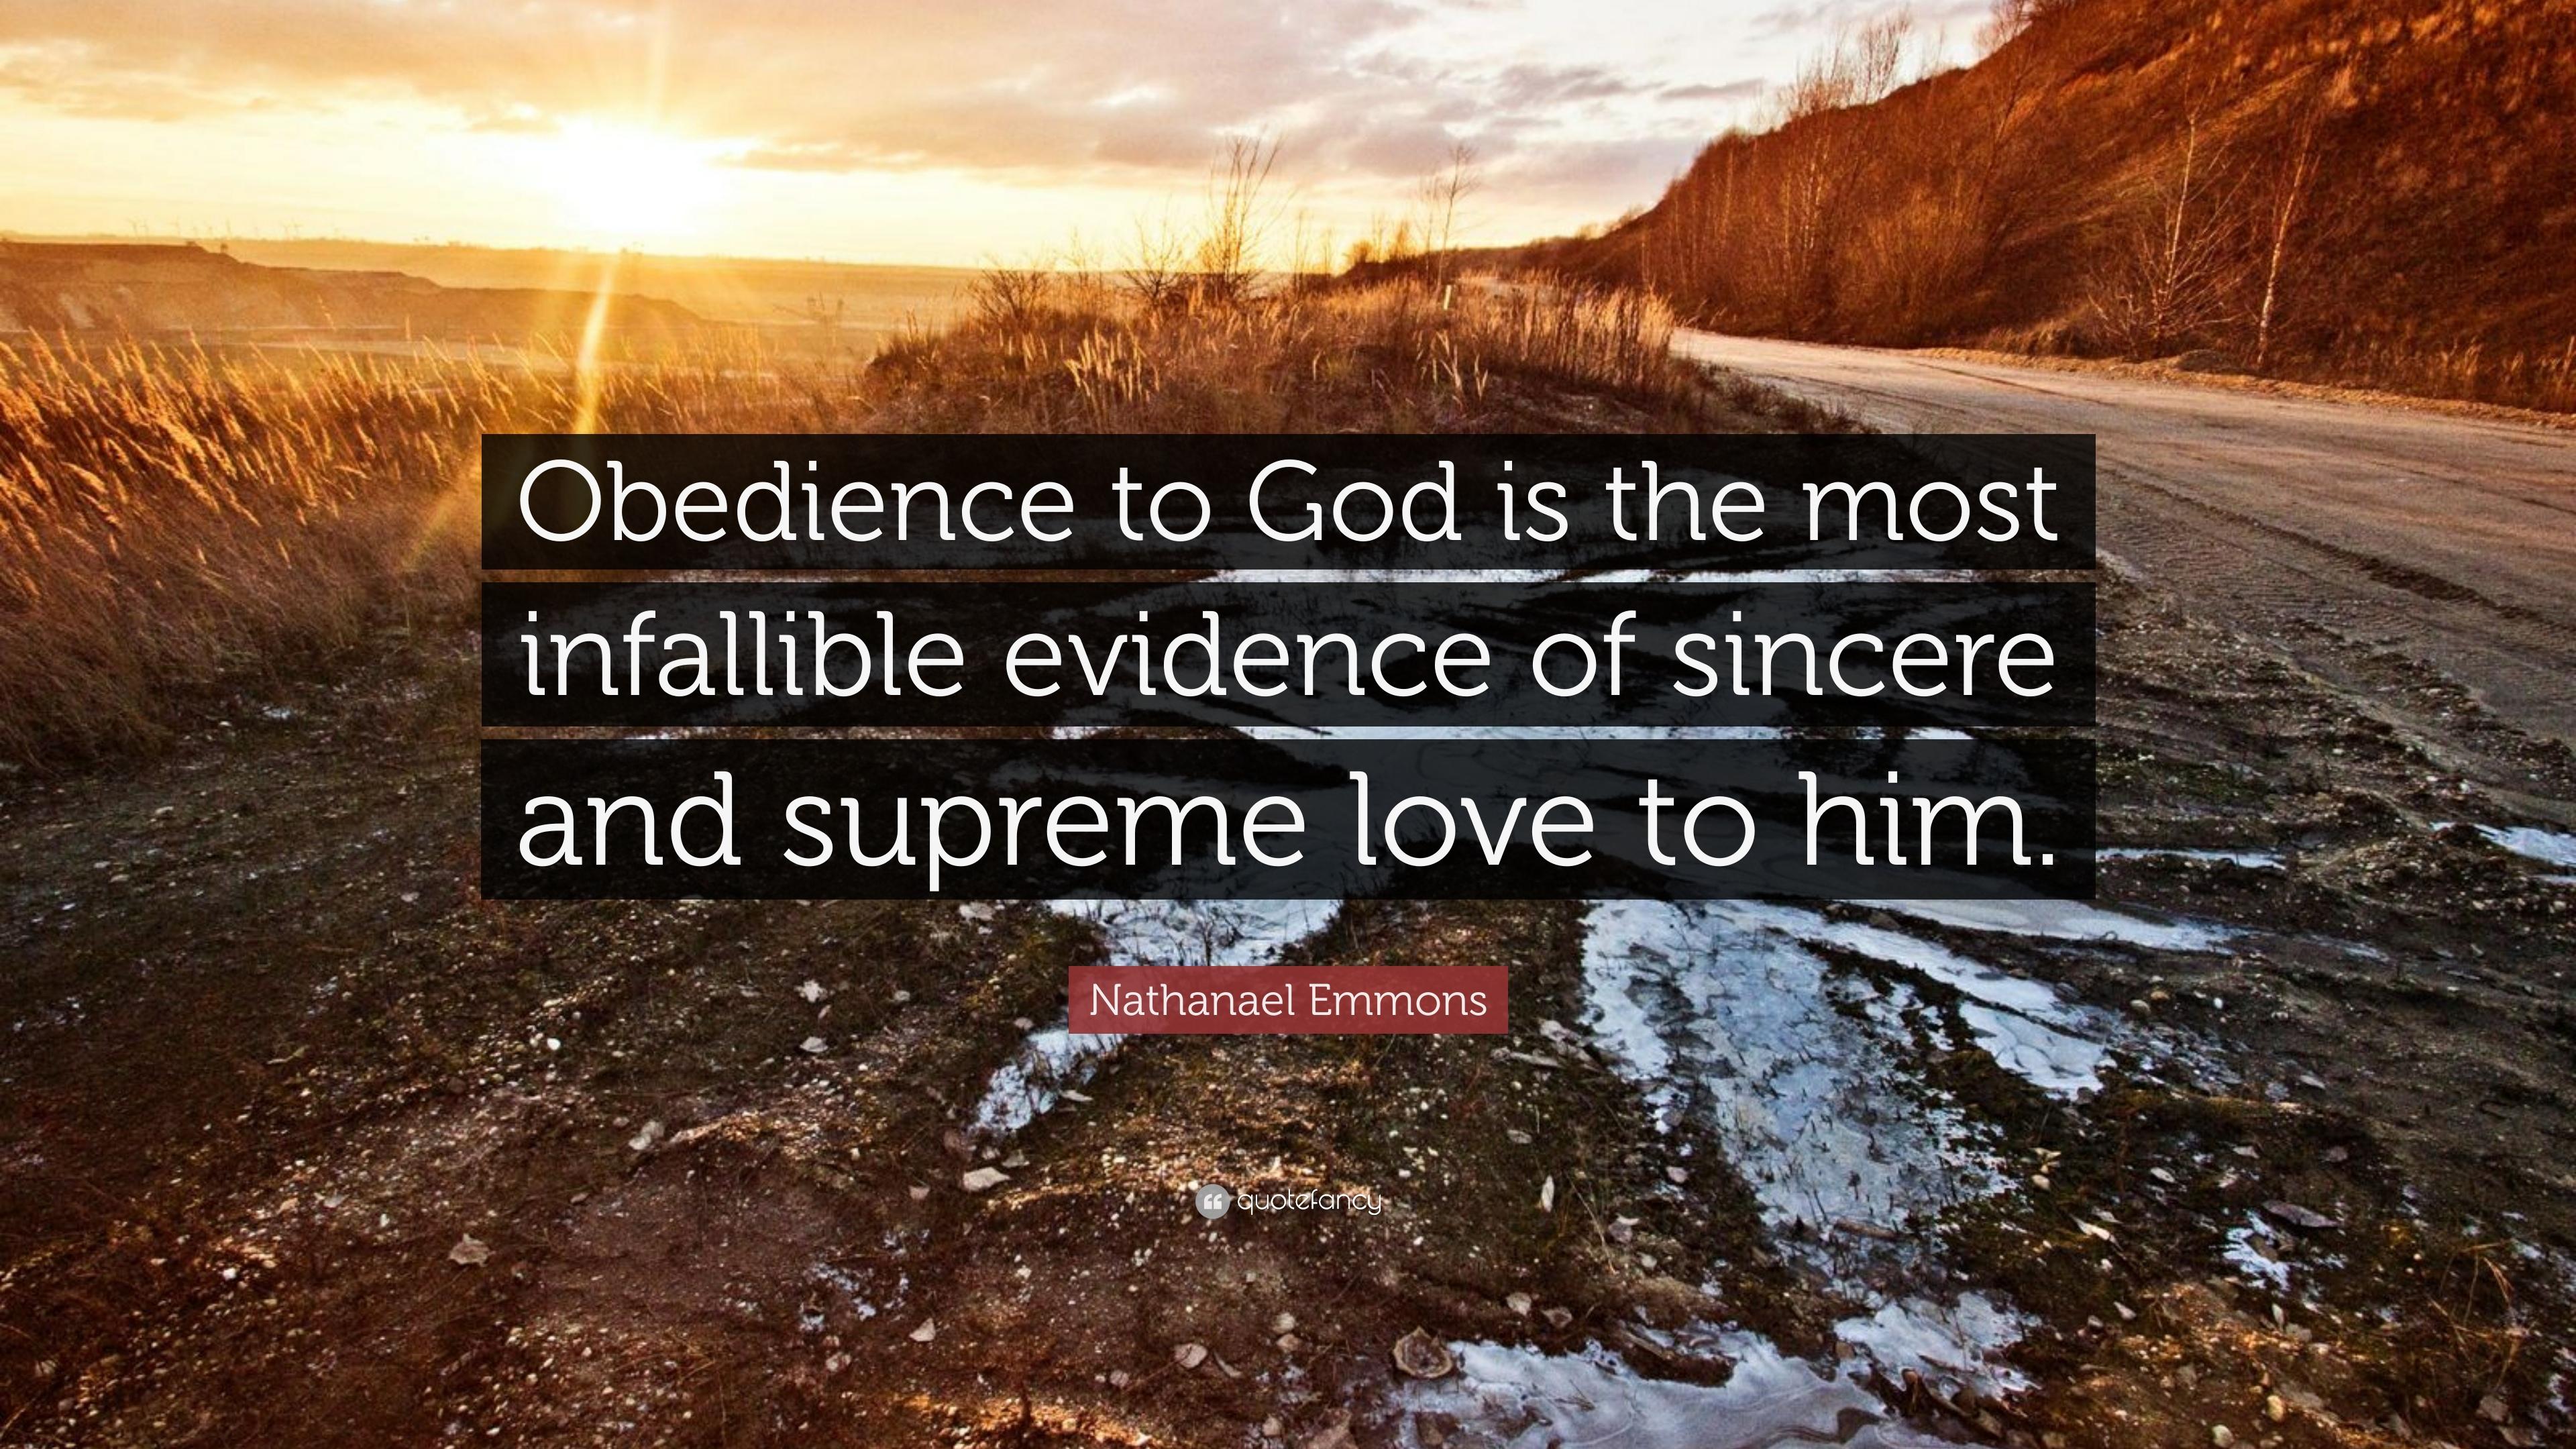 Nathanael Emmons Quote: “Obedience to God is the most